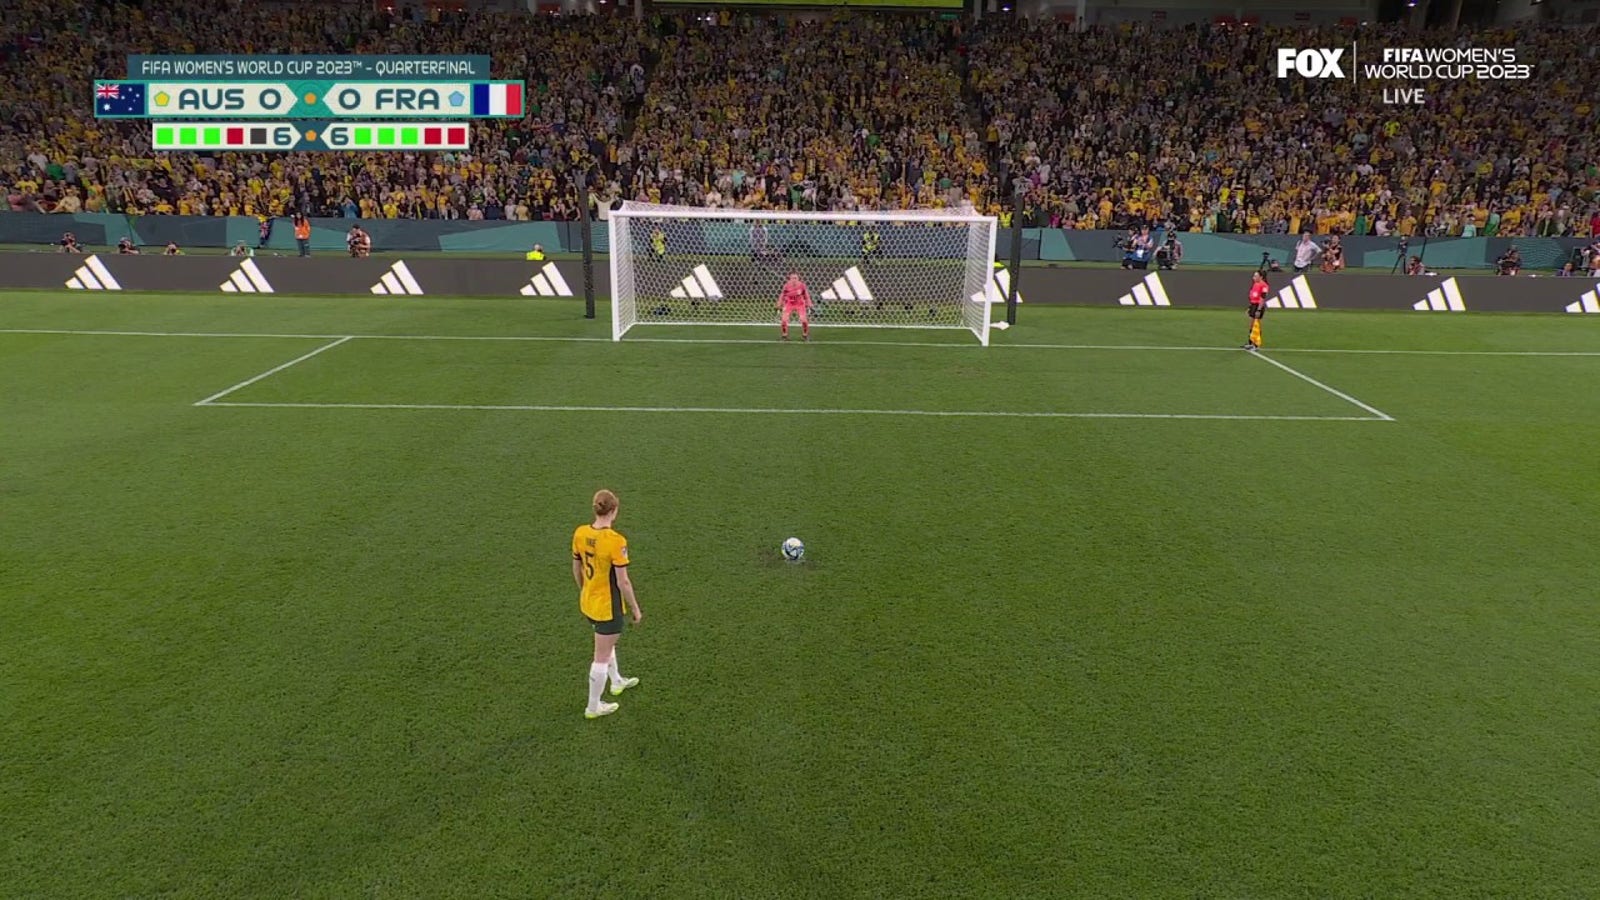 Australia advanced to the semi-finals after a penalty shoot-out.  France